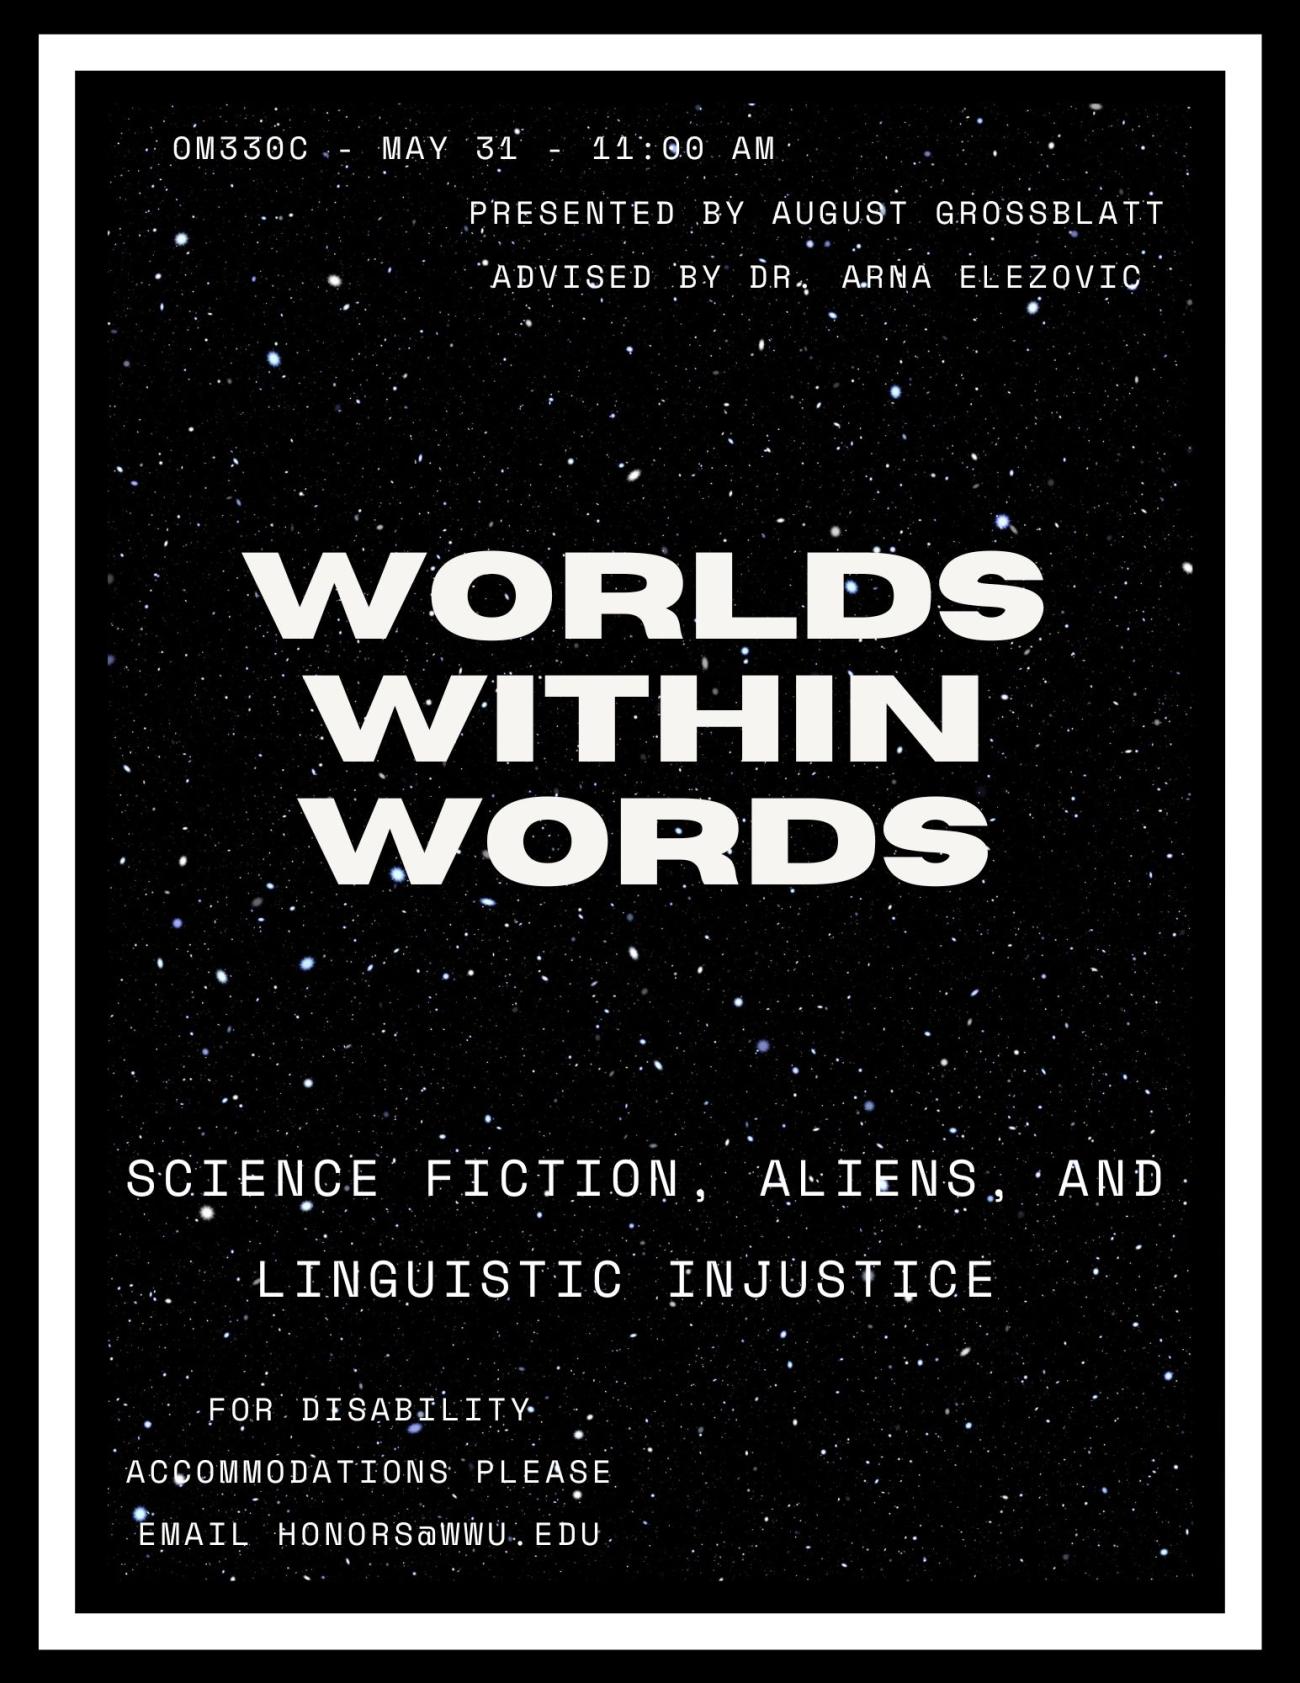 The poster has a black, starry background and a white border. The text reads "Worlds Within Words: Science Fiction, Aliens, and Linguistic Injustice. Presented by August Grossblatt, Advised by Dr. Arna Elezovic. OM330C, May 31st, 11:00 AM. For disability accommodations, please email honors@wwu.edu."